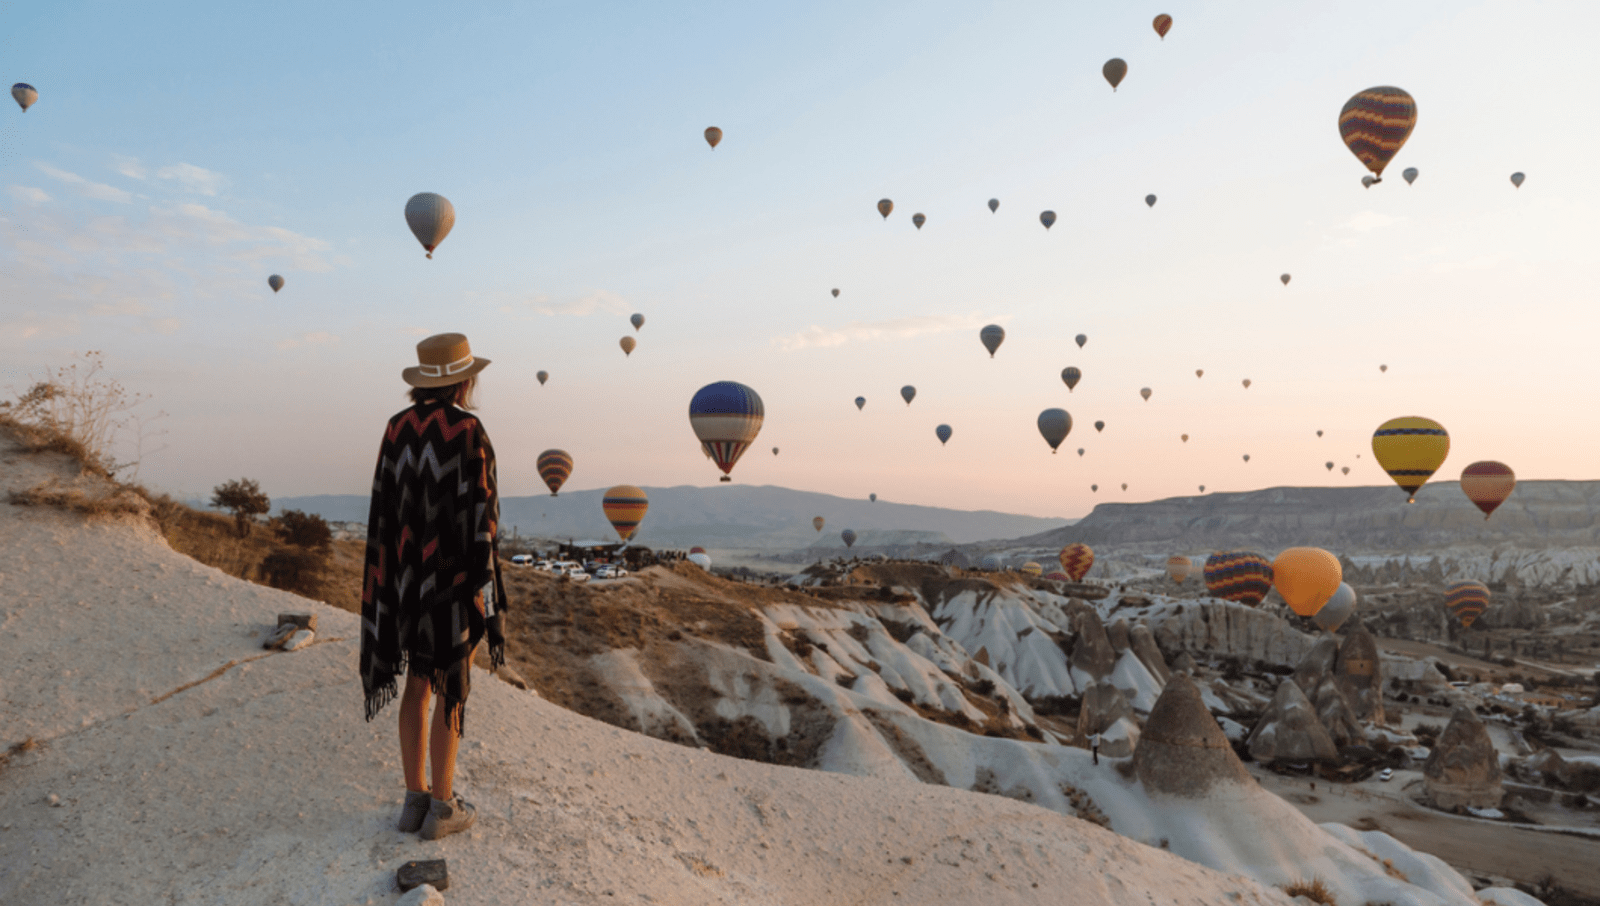 lady standing on cliff looking at lots of hot air balloons in the sky